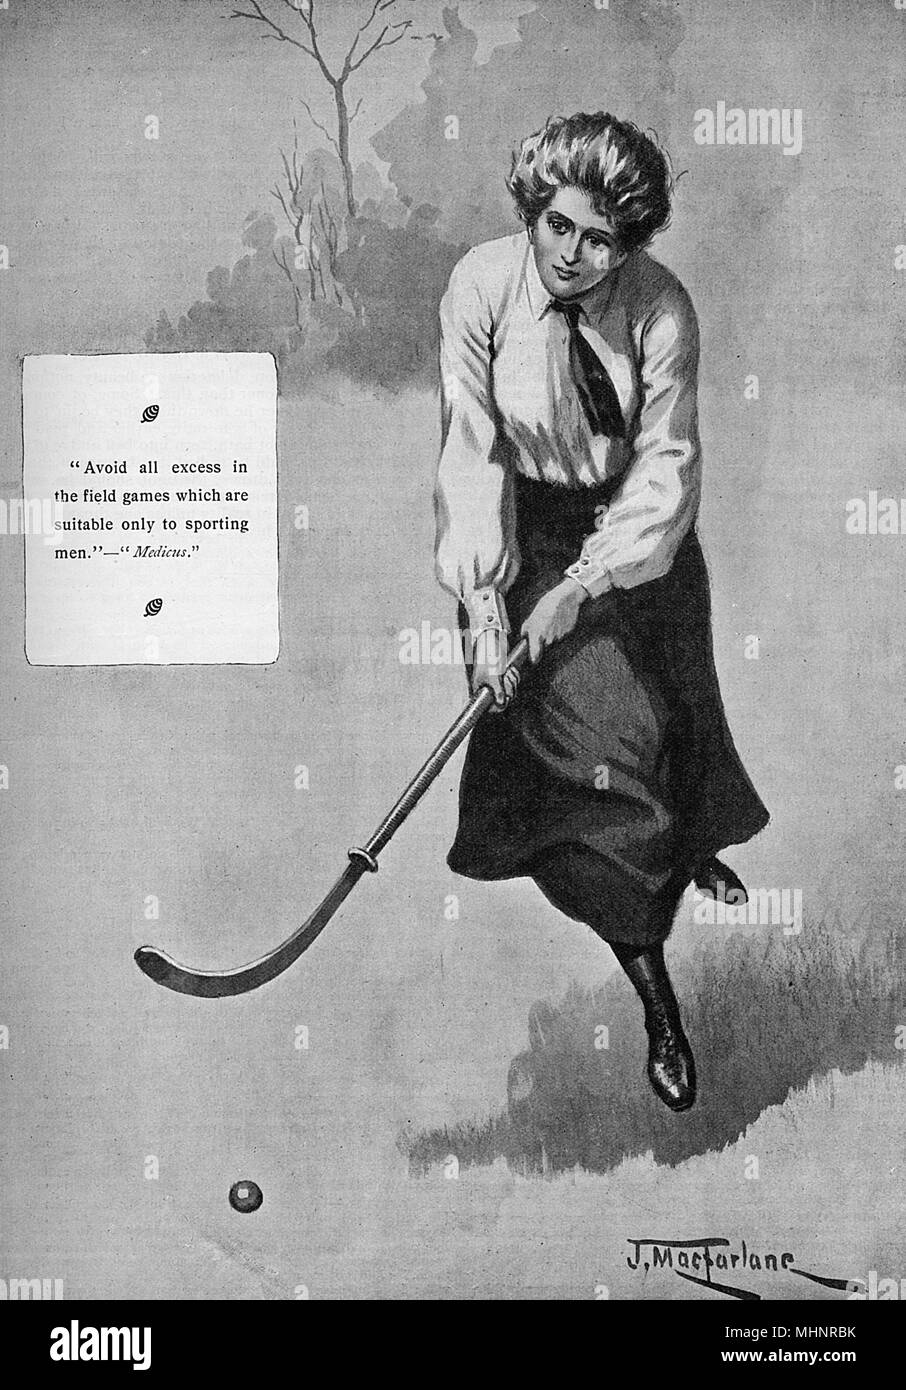 A female hockey player from the Edwardian period, clearly disputing the advice from Medicus (insert) that women should, 'avoid all excess in the field games which are suitable only to sporting men.'       Date: 1908 Stock Photo